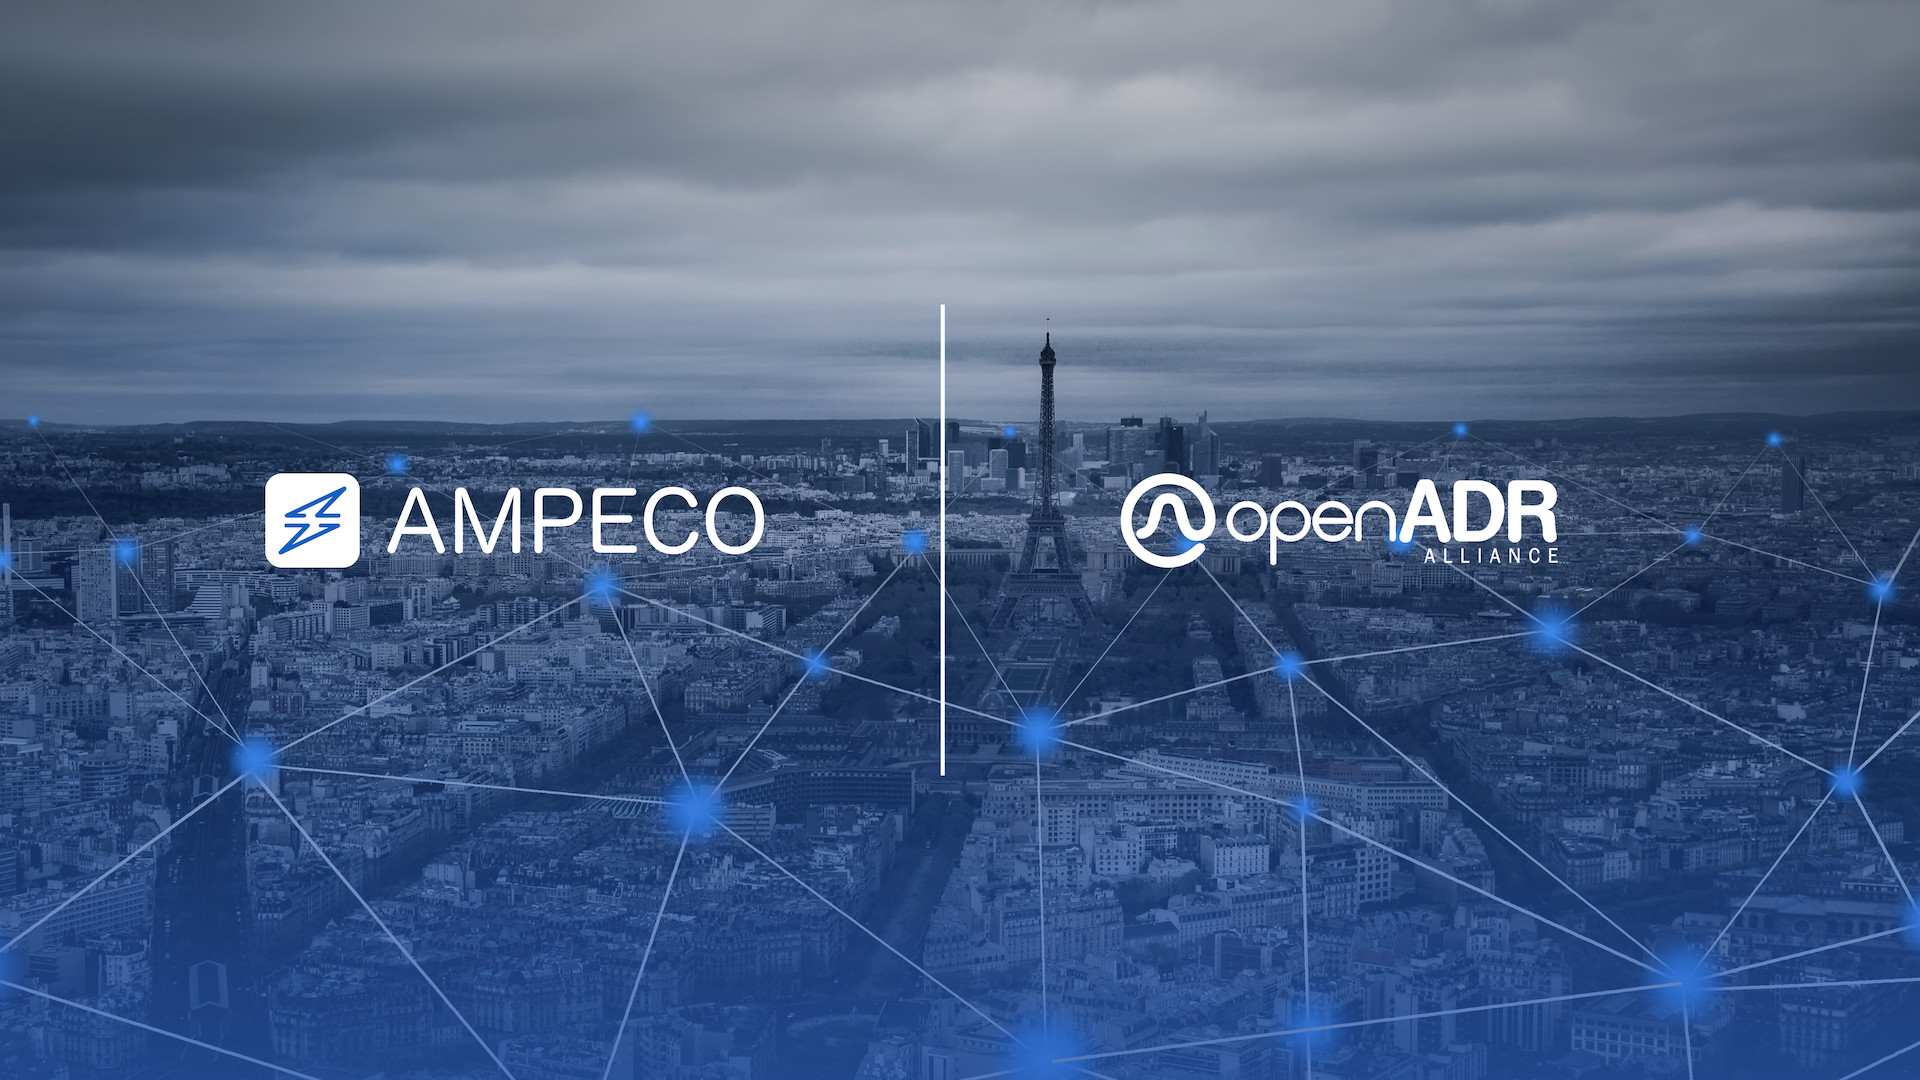 AMPECO and OpenADR Alliance partner to unlock energy flexibility opportunities in Europe